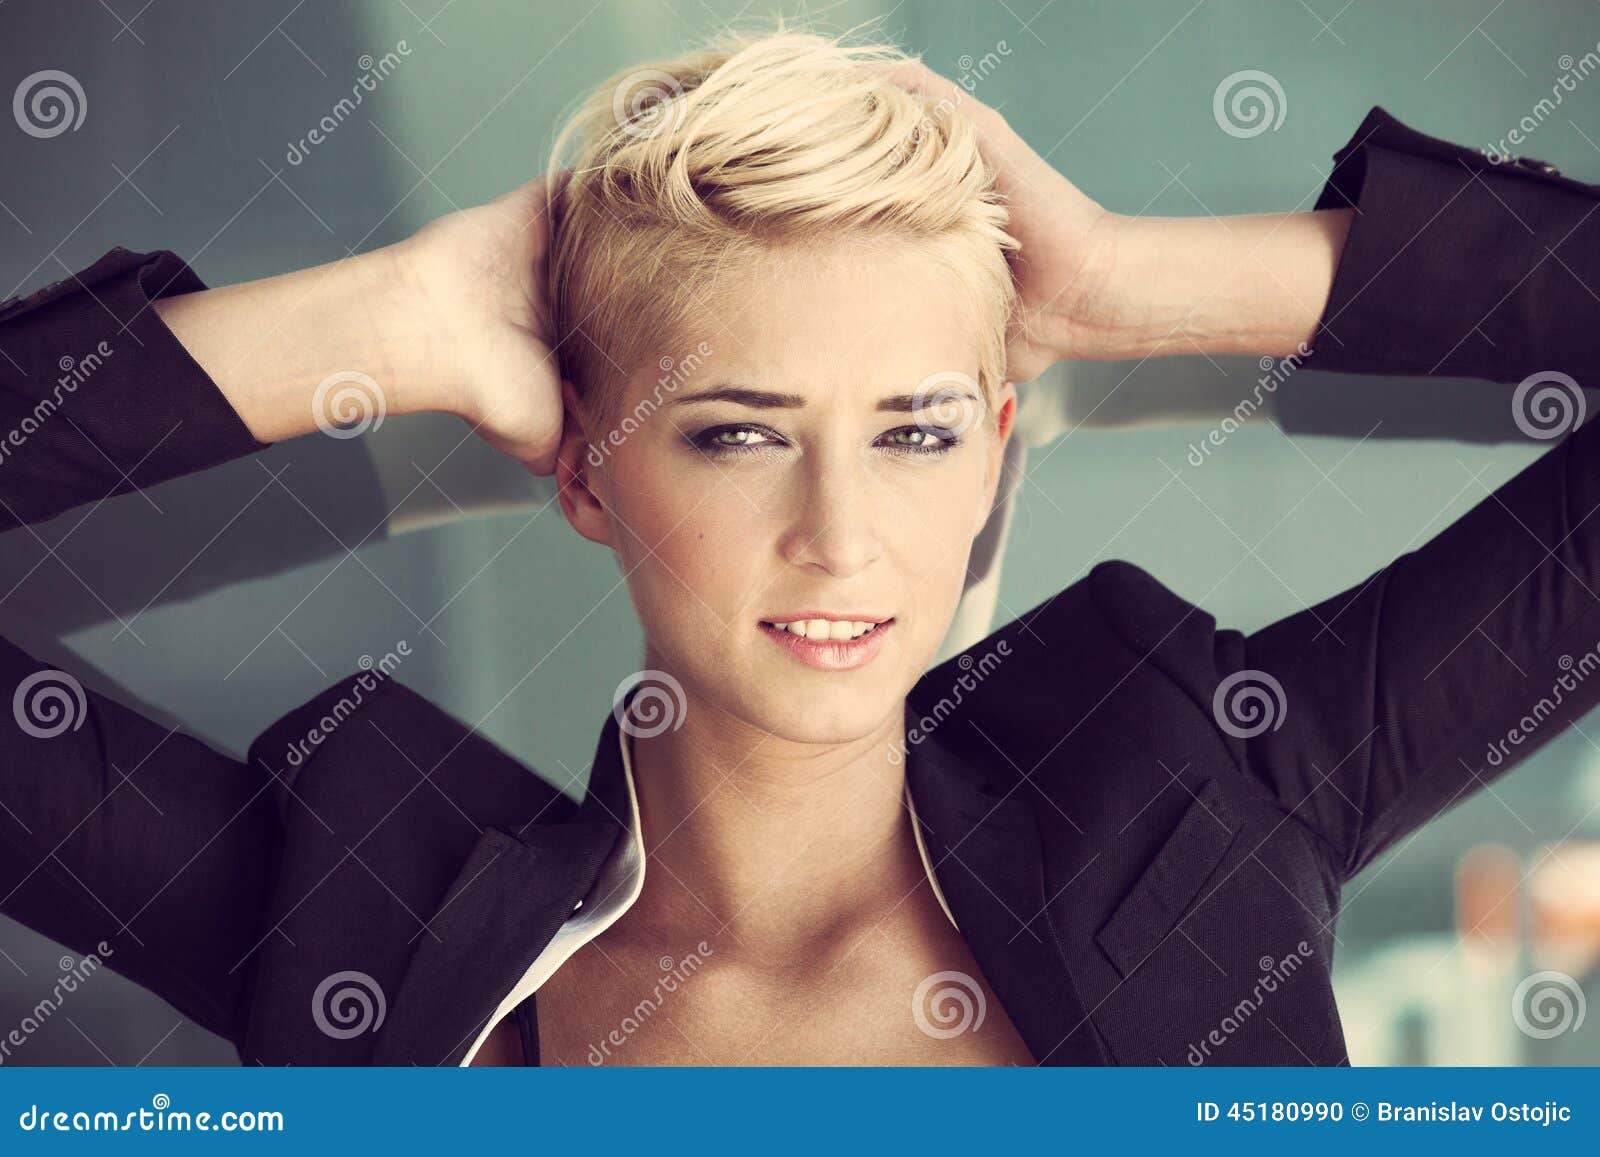 Short Hair Blonde Woman Stock Photo Image Of Girl Business 45180990